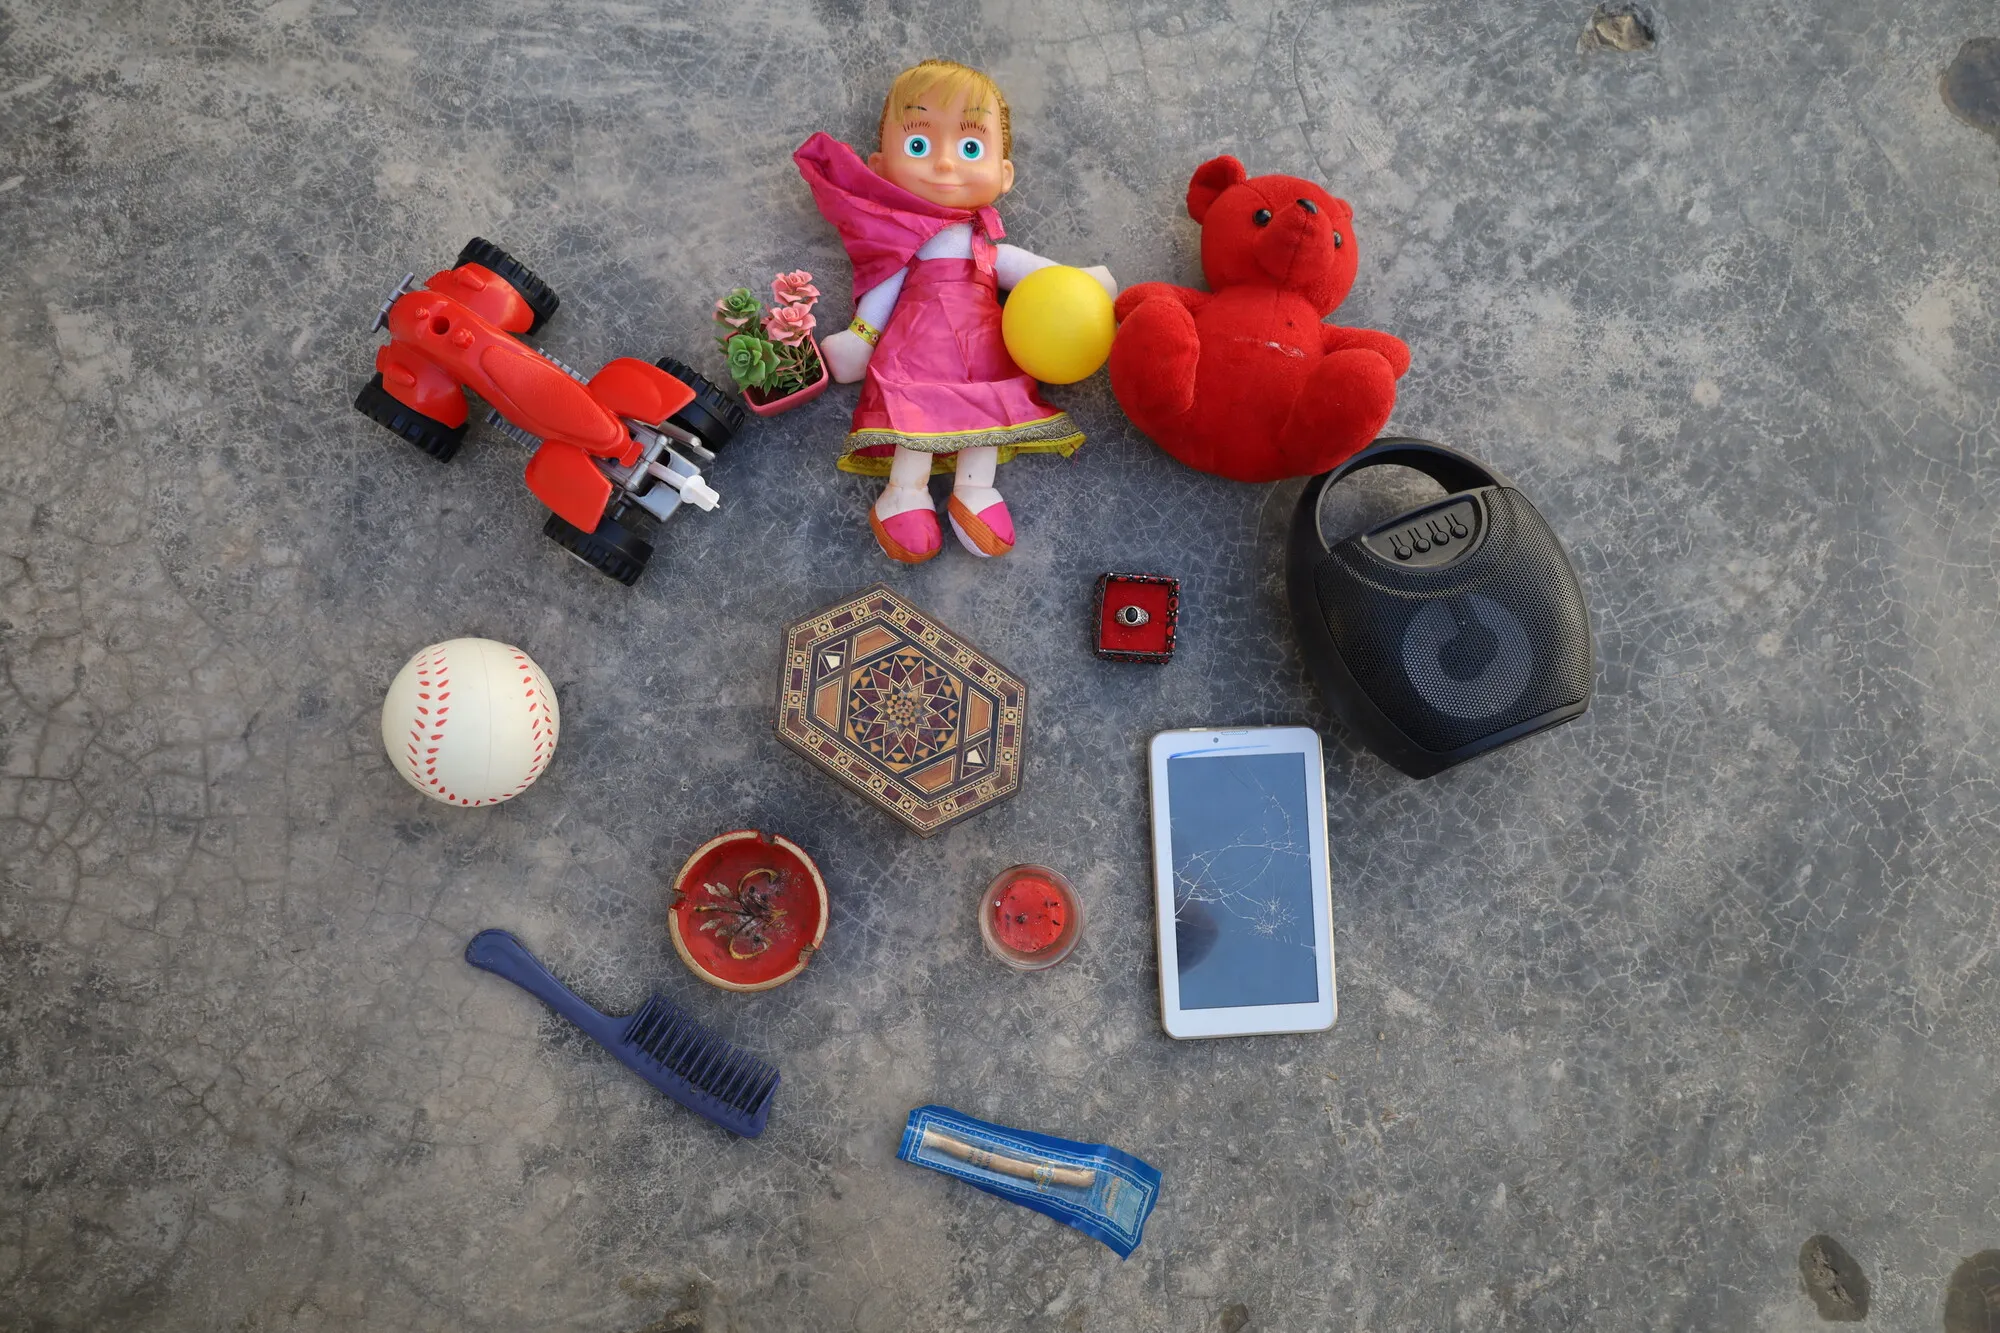 An assortment of children's toys, including dolls, a ball, a car, and a comb.